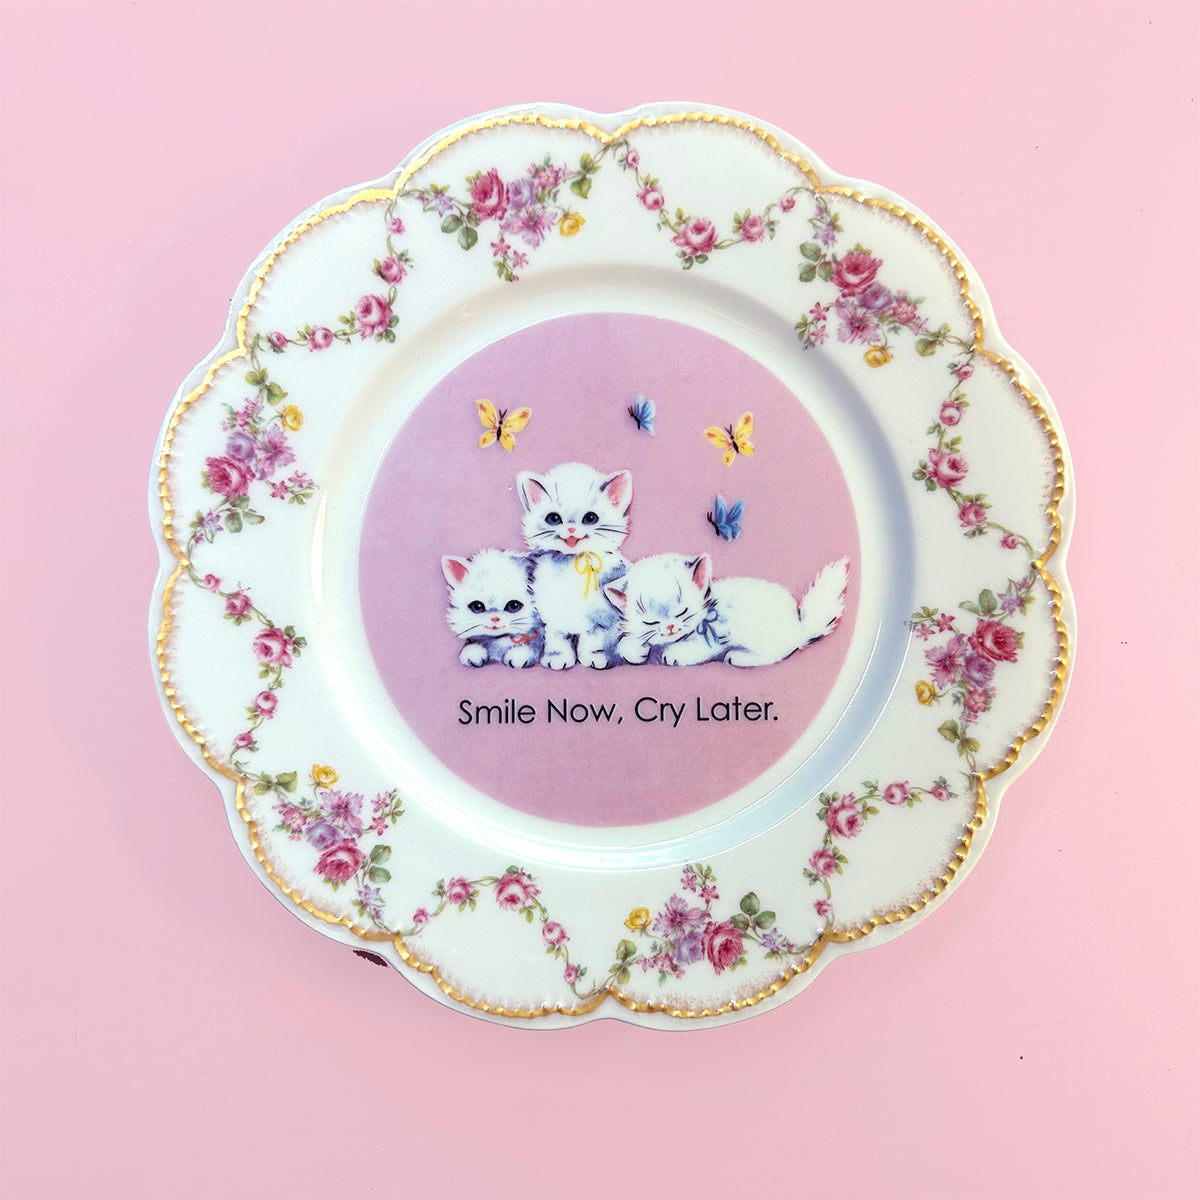 Vintage Art Plate -Art Plate - "Smile Now, Cry Later."